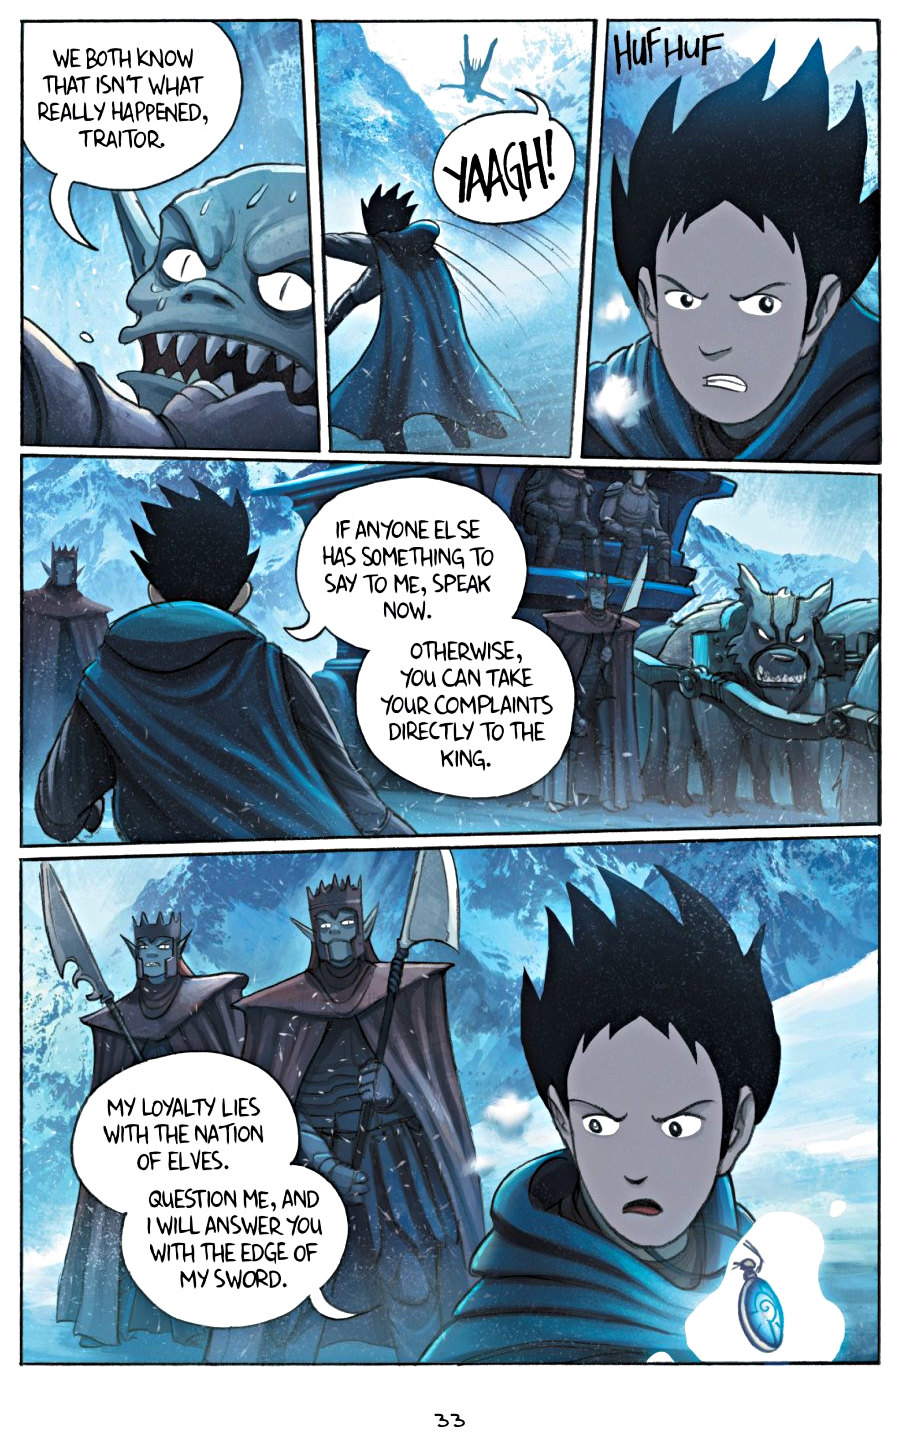 page 33 of amulet 5 prince of the elves graphic novel